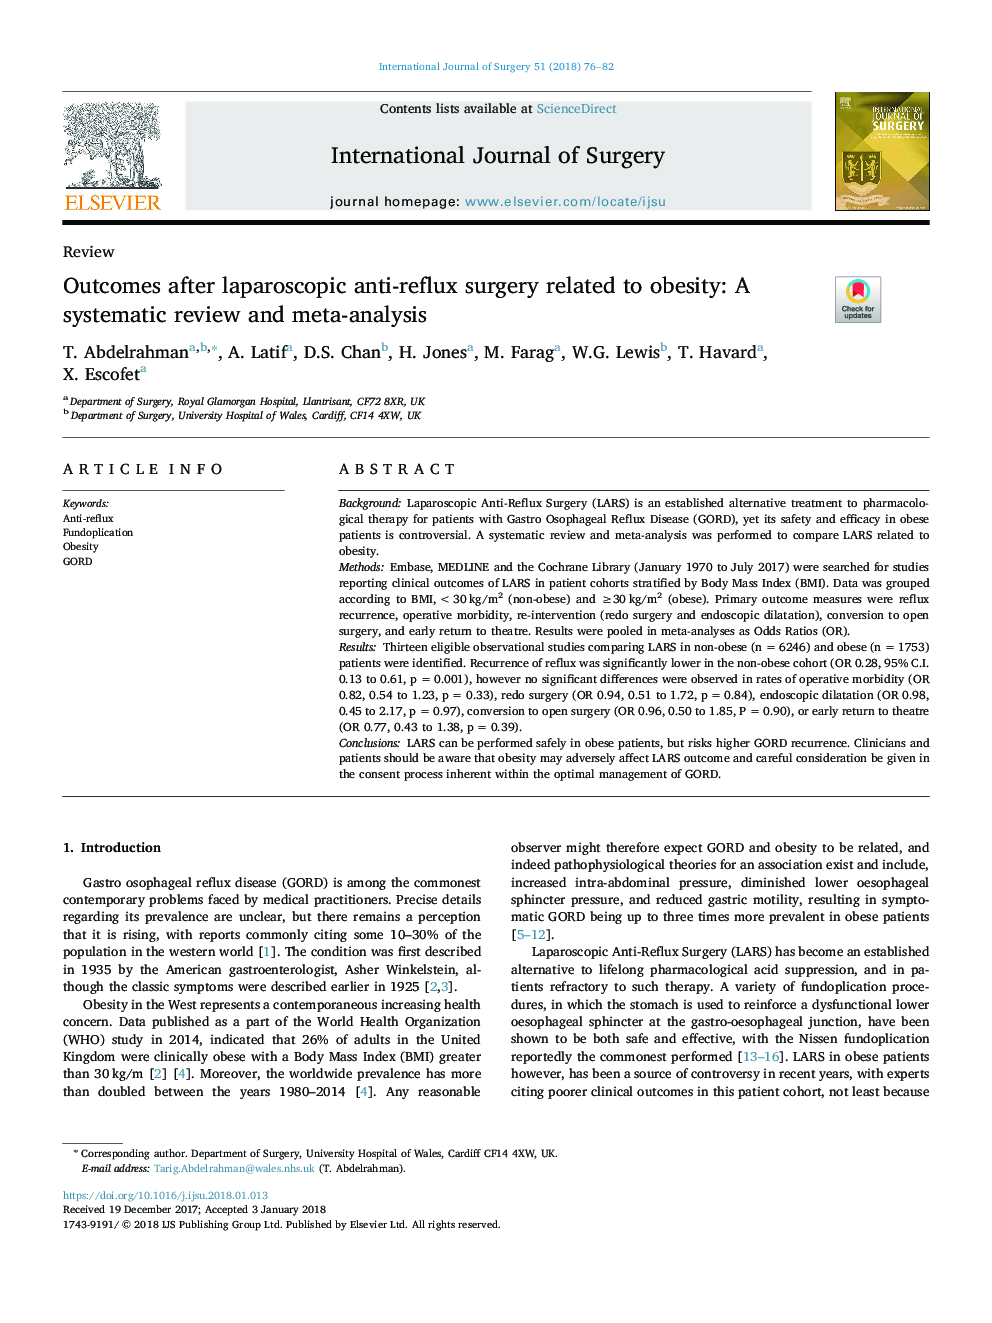 Outcomes after laparoscopic anti-reflux surgery related to obesity: A systematic review and meta-analysis